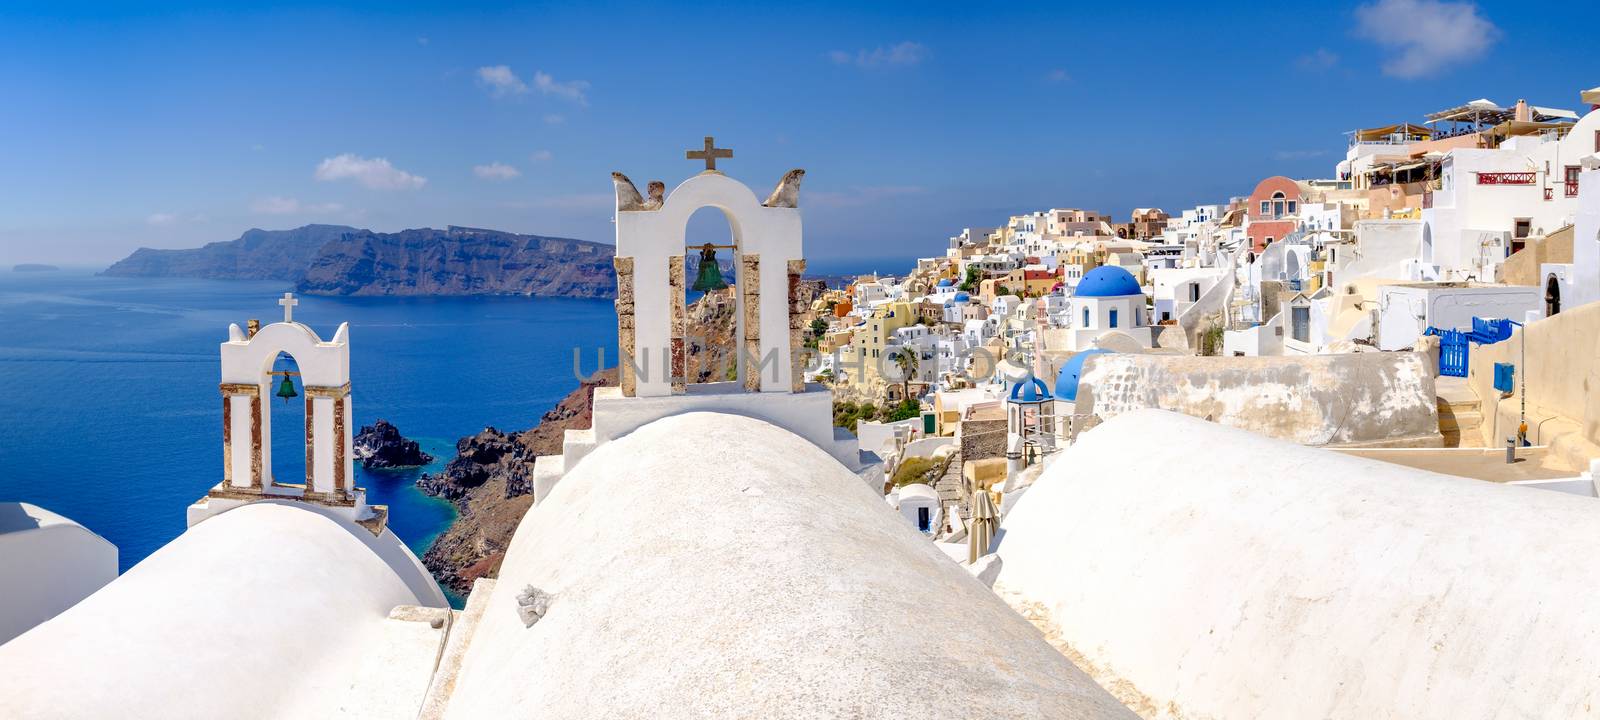 Panoramic view at rooftops of romantic village in Santorini by martinm303